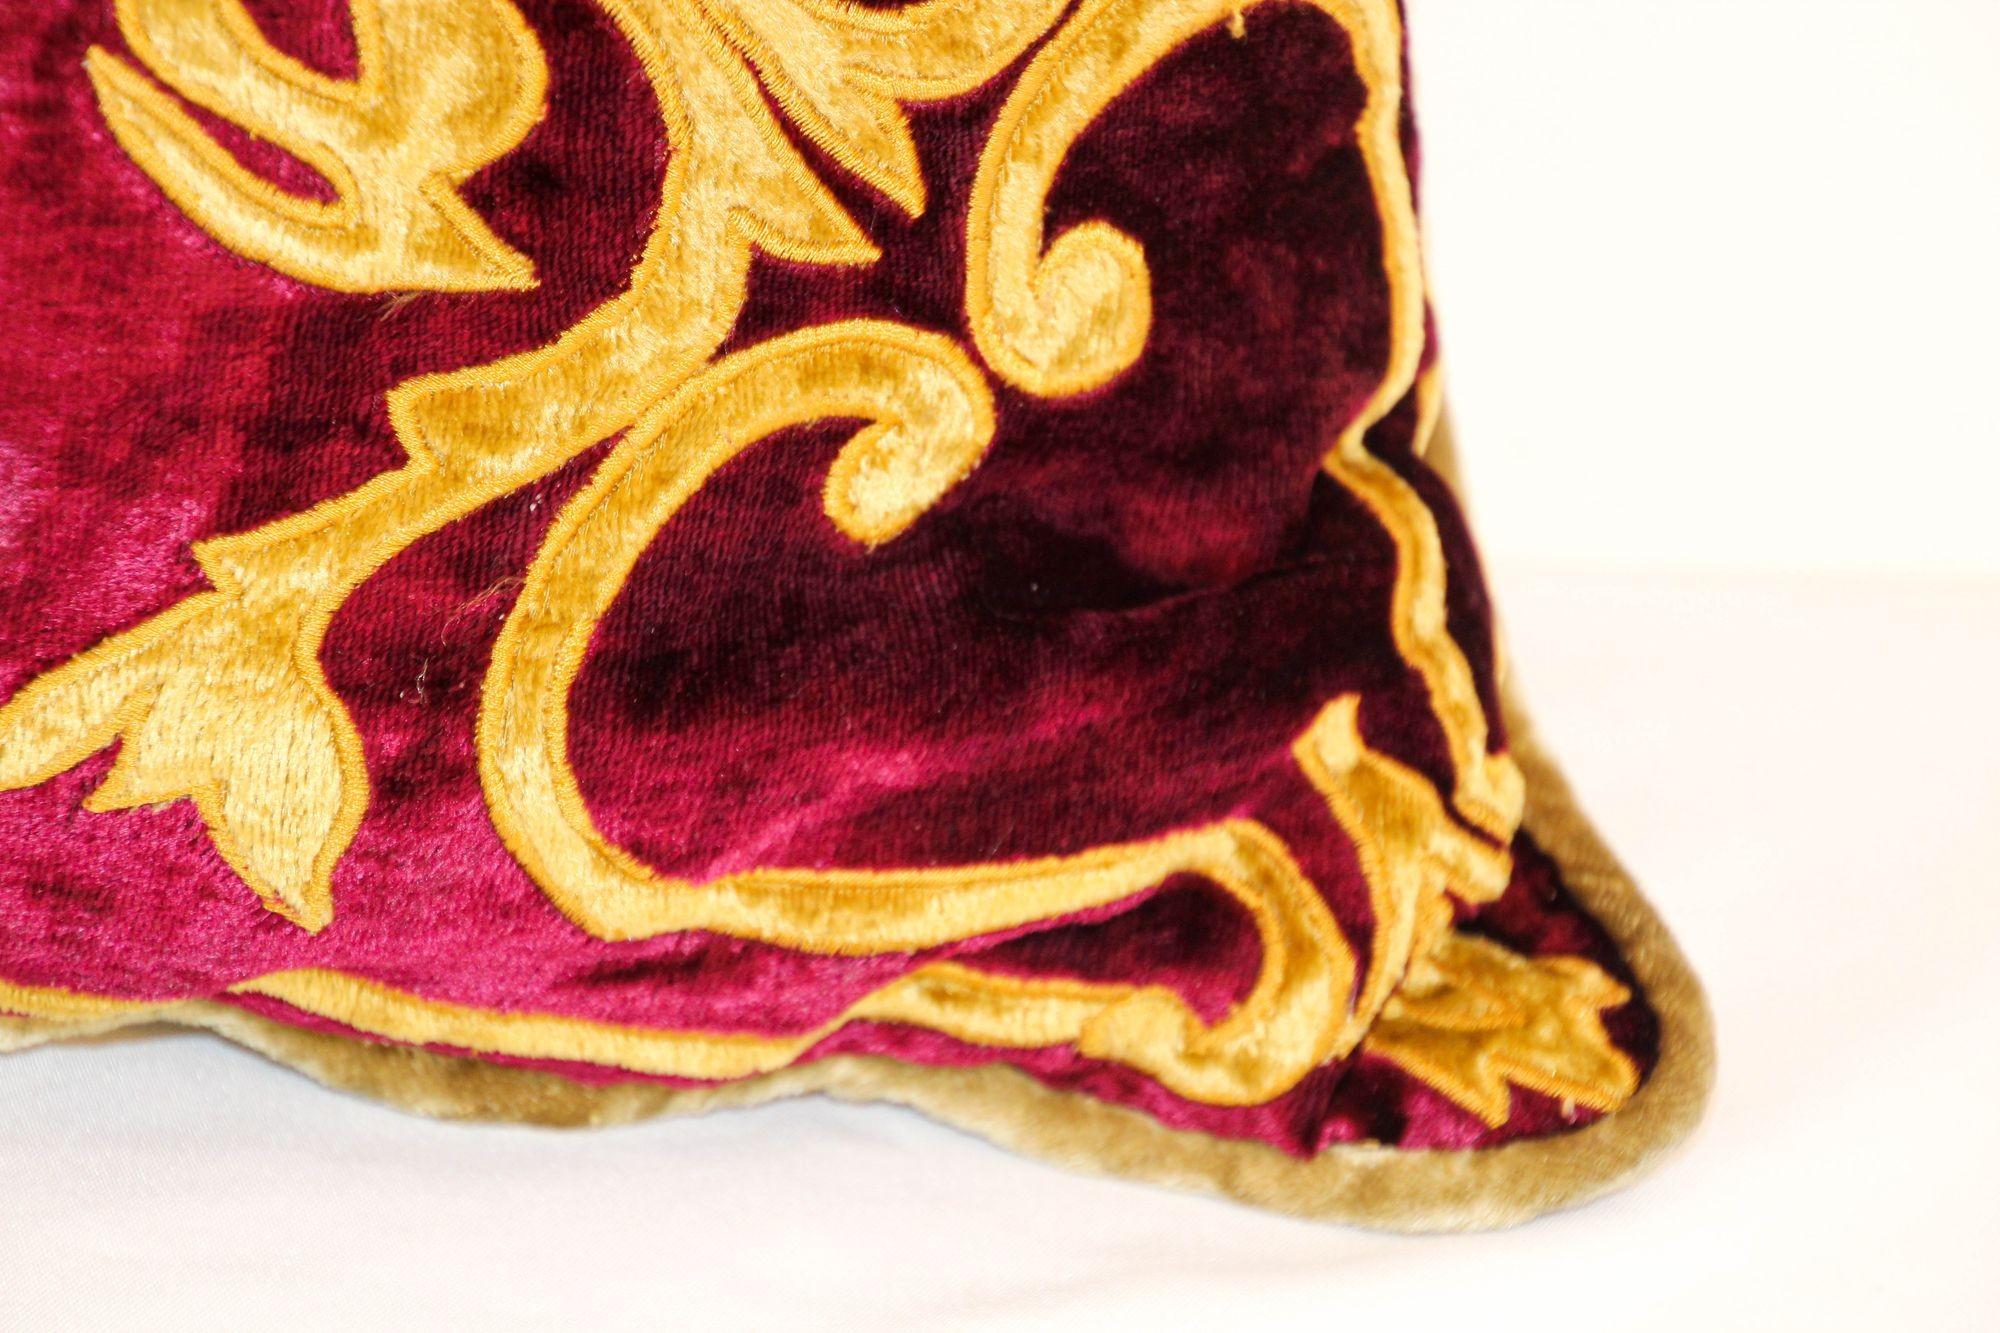 20th Century Venetian Baroque Red and Gold Velvet Pillows with Elaborate Applique Work a Pair For Sale